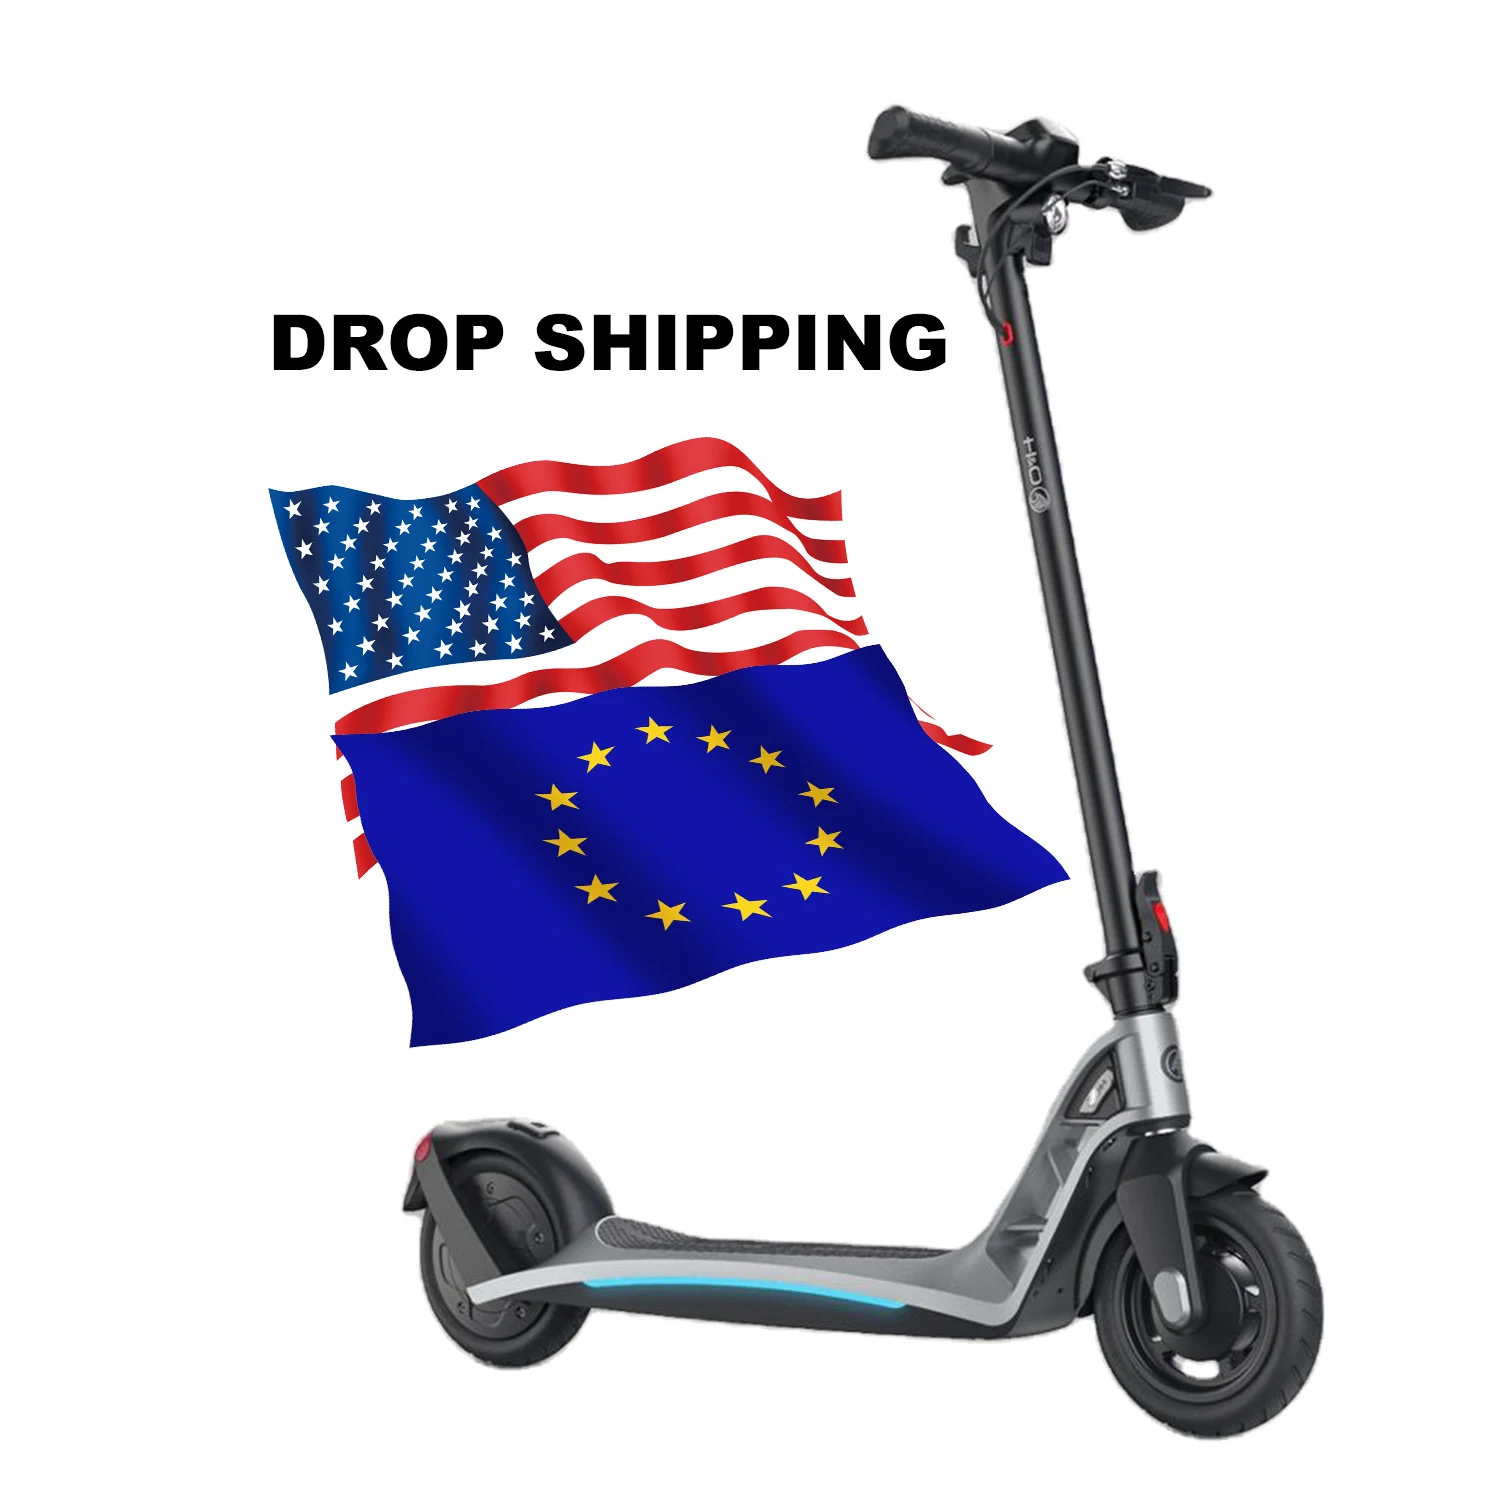 

H10 EU US Warehouse OEM Red Dot Award Electrica Scuter Magnesium Alloy Foldable Waterproof Electronic Electric E Scooter